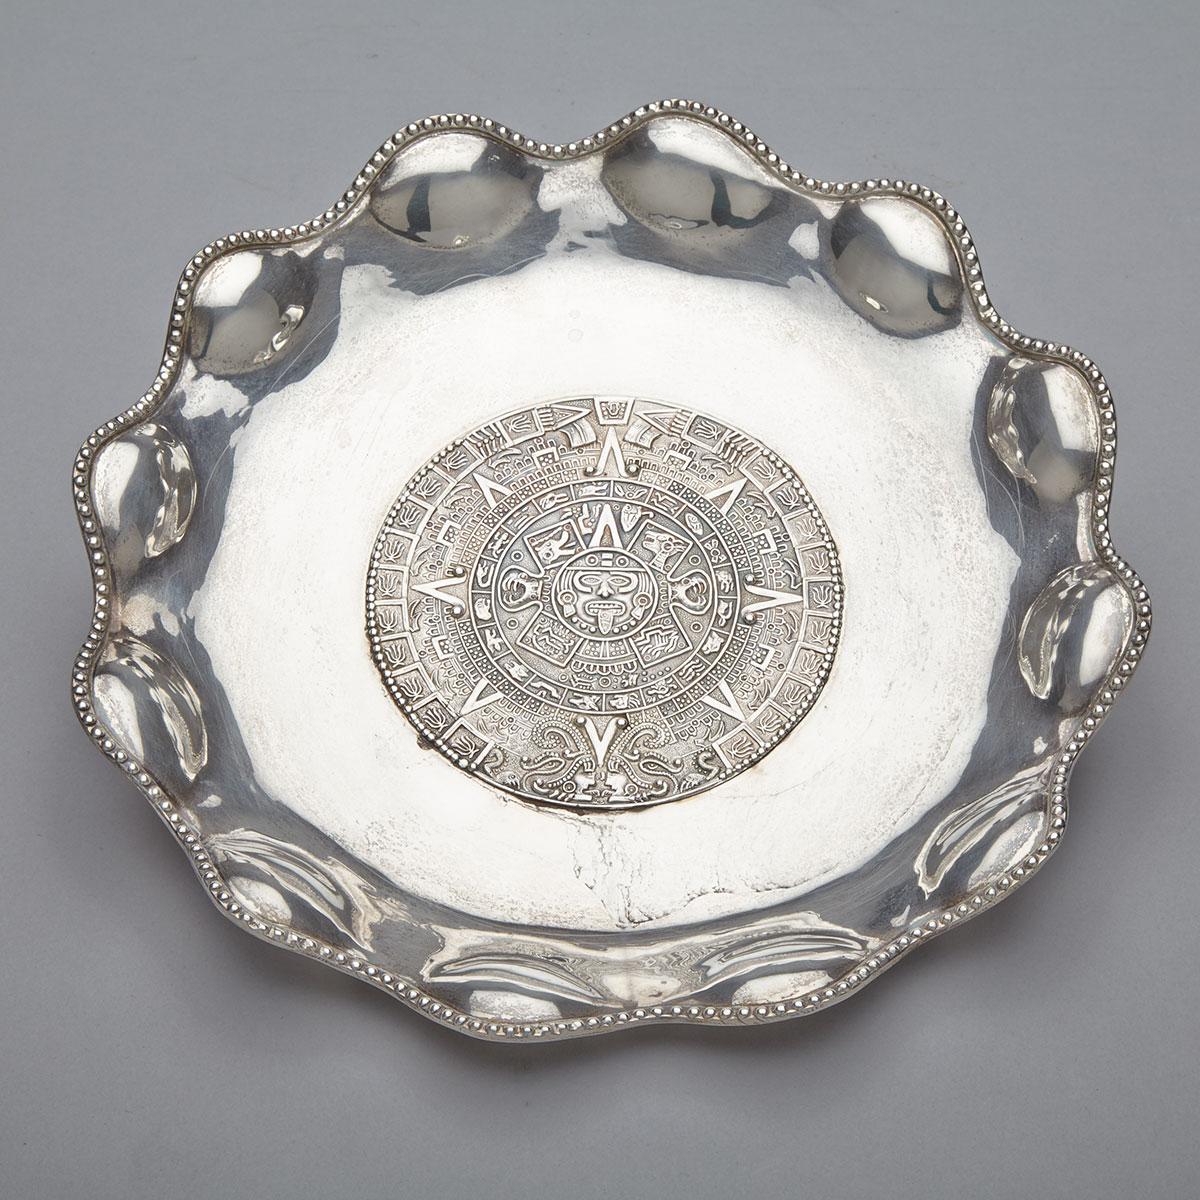 Mexican Silver Waiter, Juventino Lopez Reyes, Mexico City, mid-20th century